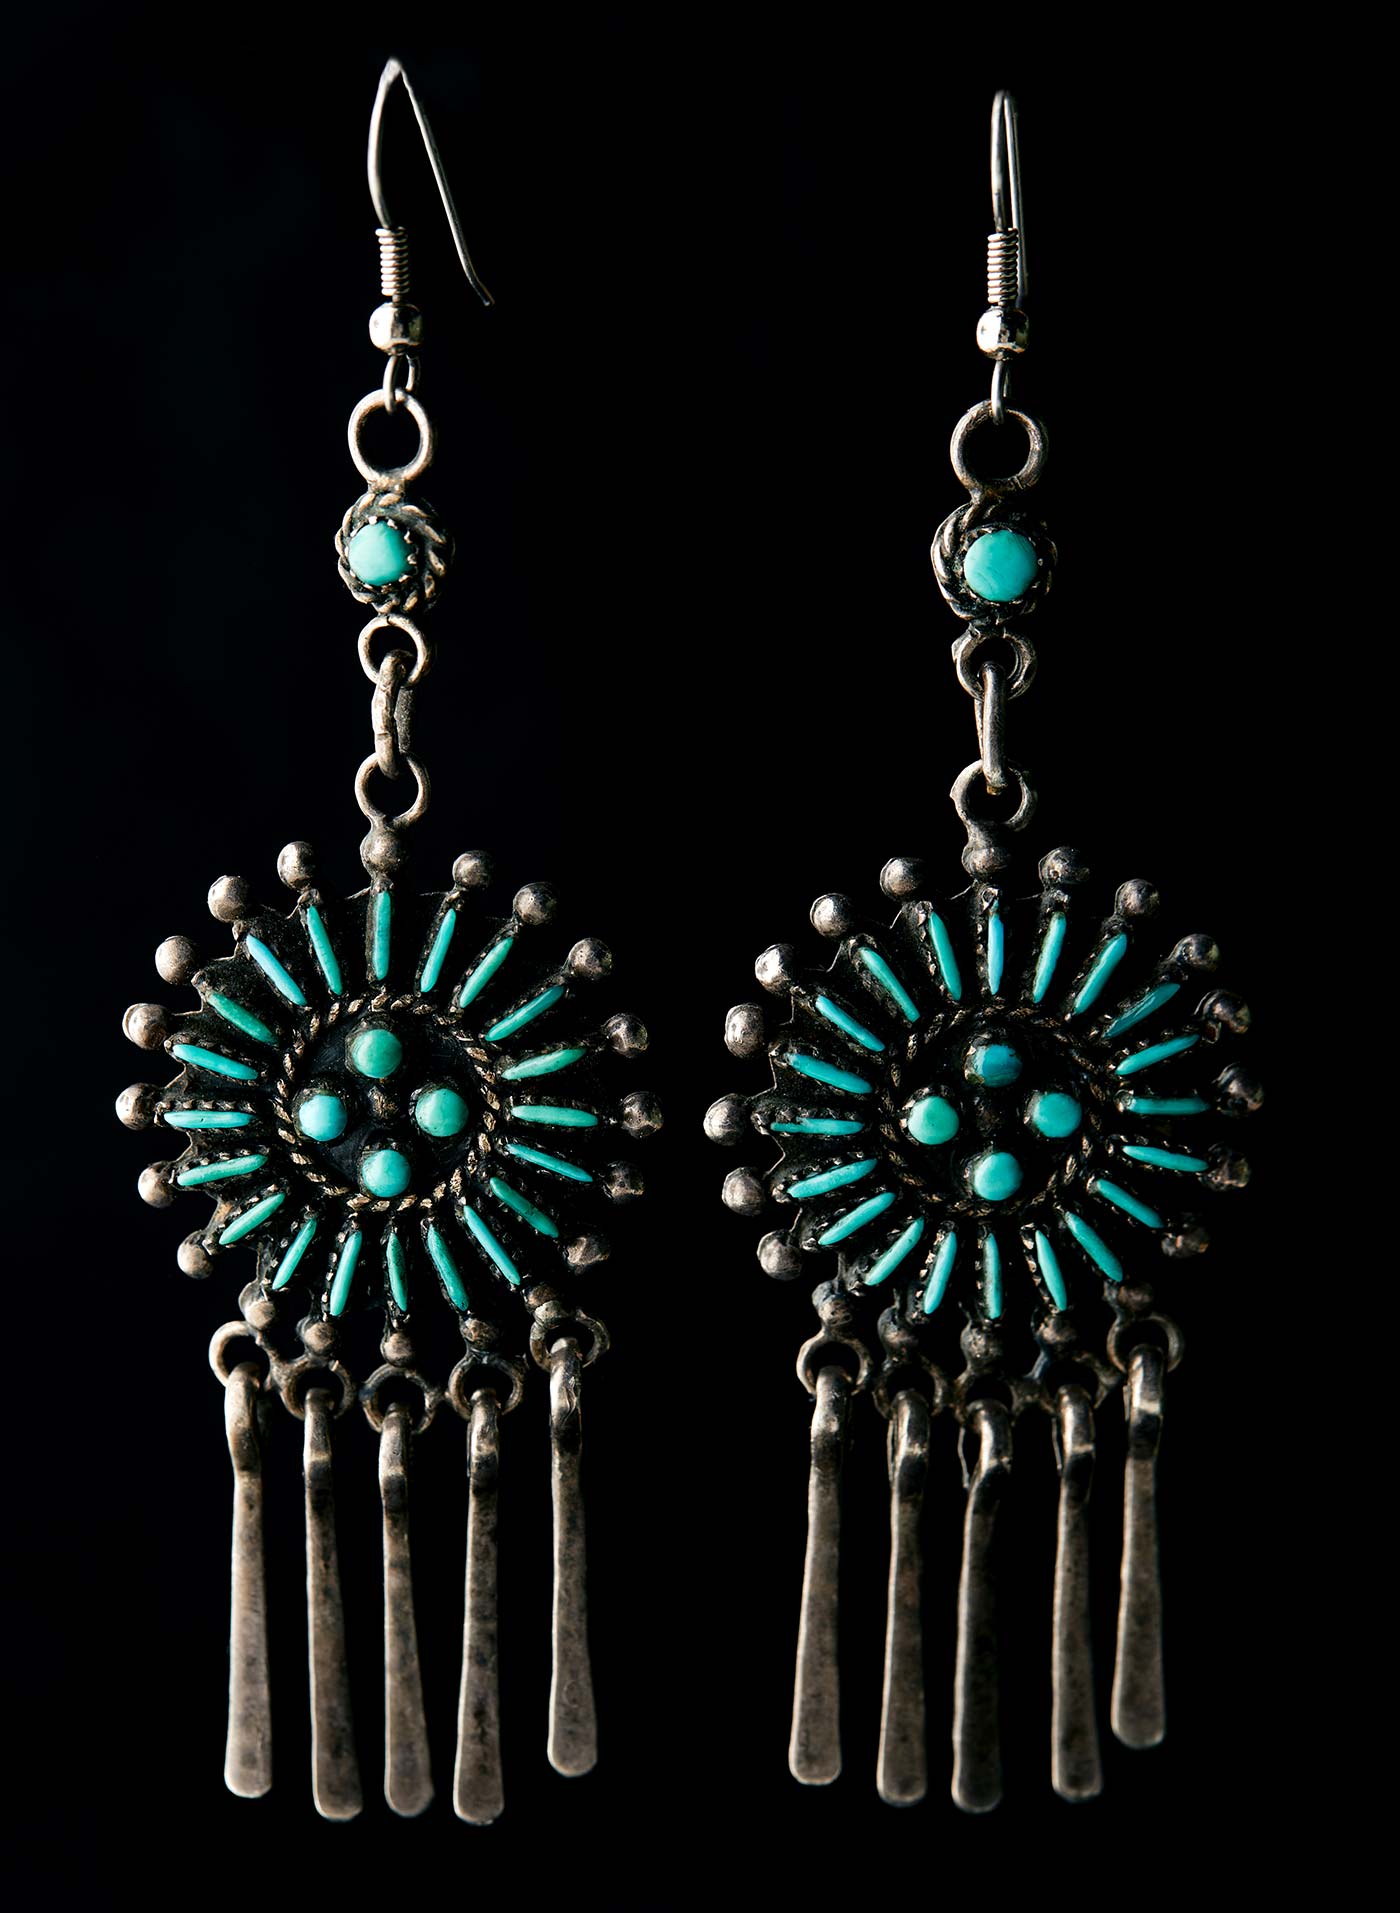 Body jewelry, Light, Natural material, Creative arts, Red, Aqua, Jewellery, Jewelry making, Electric blue, Silver